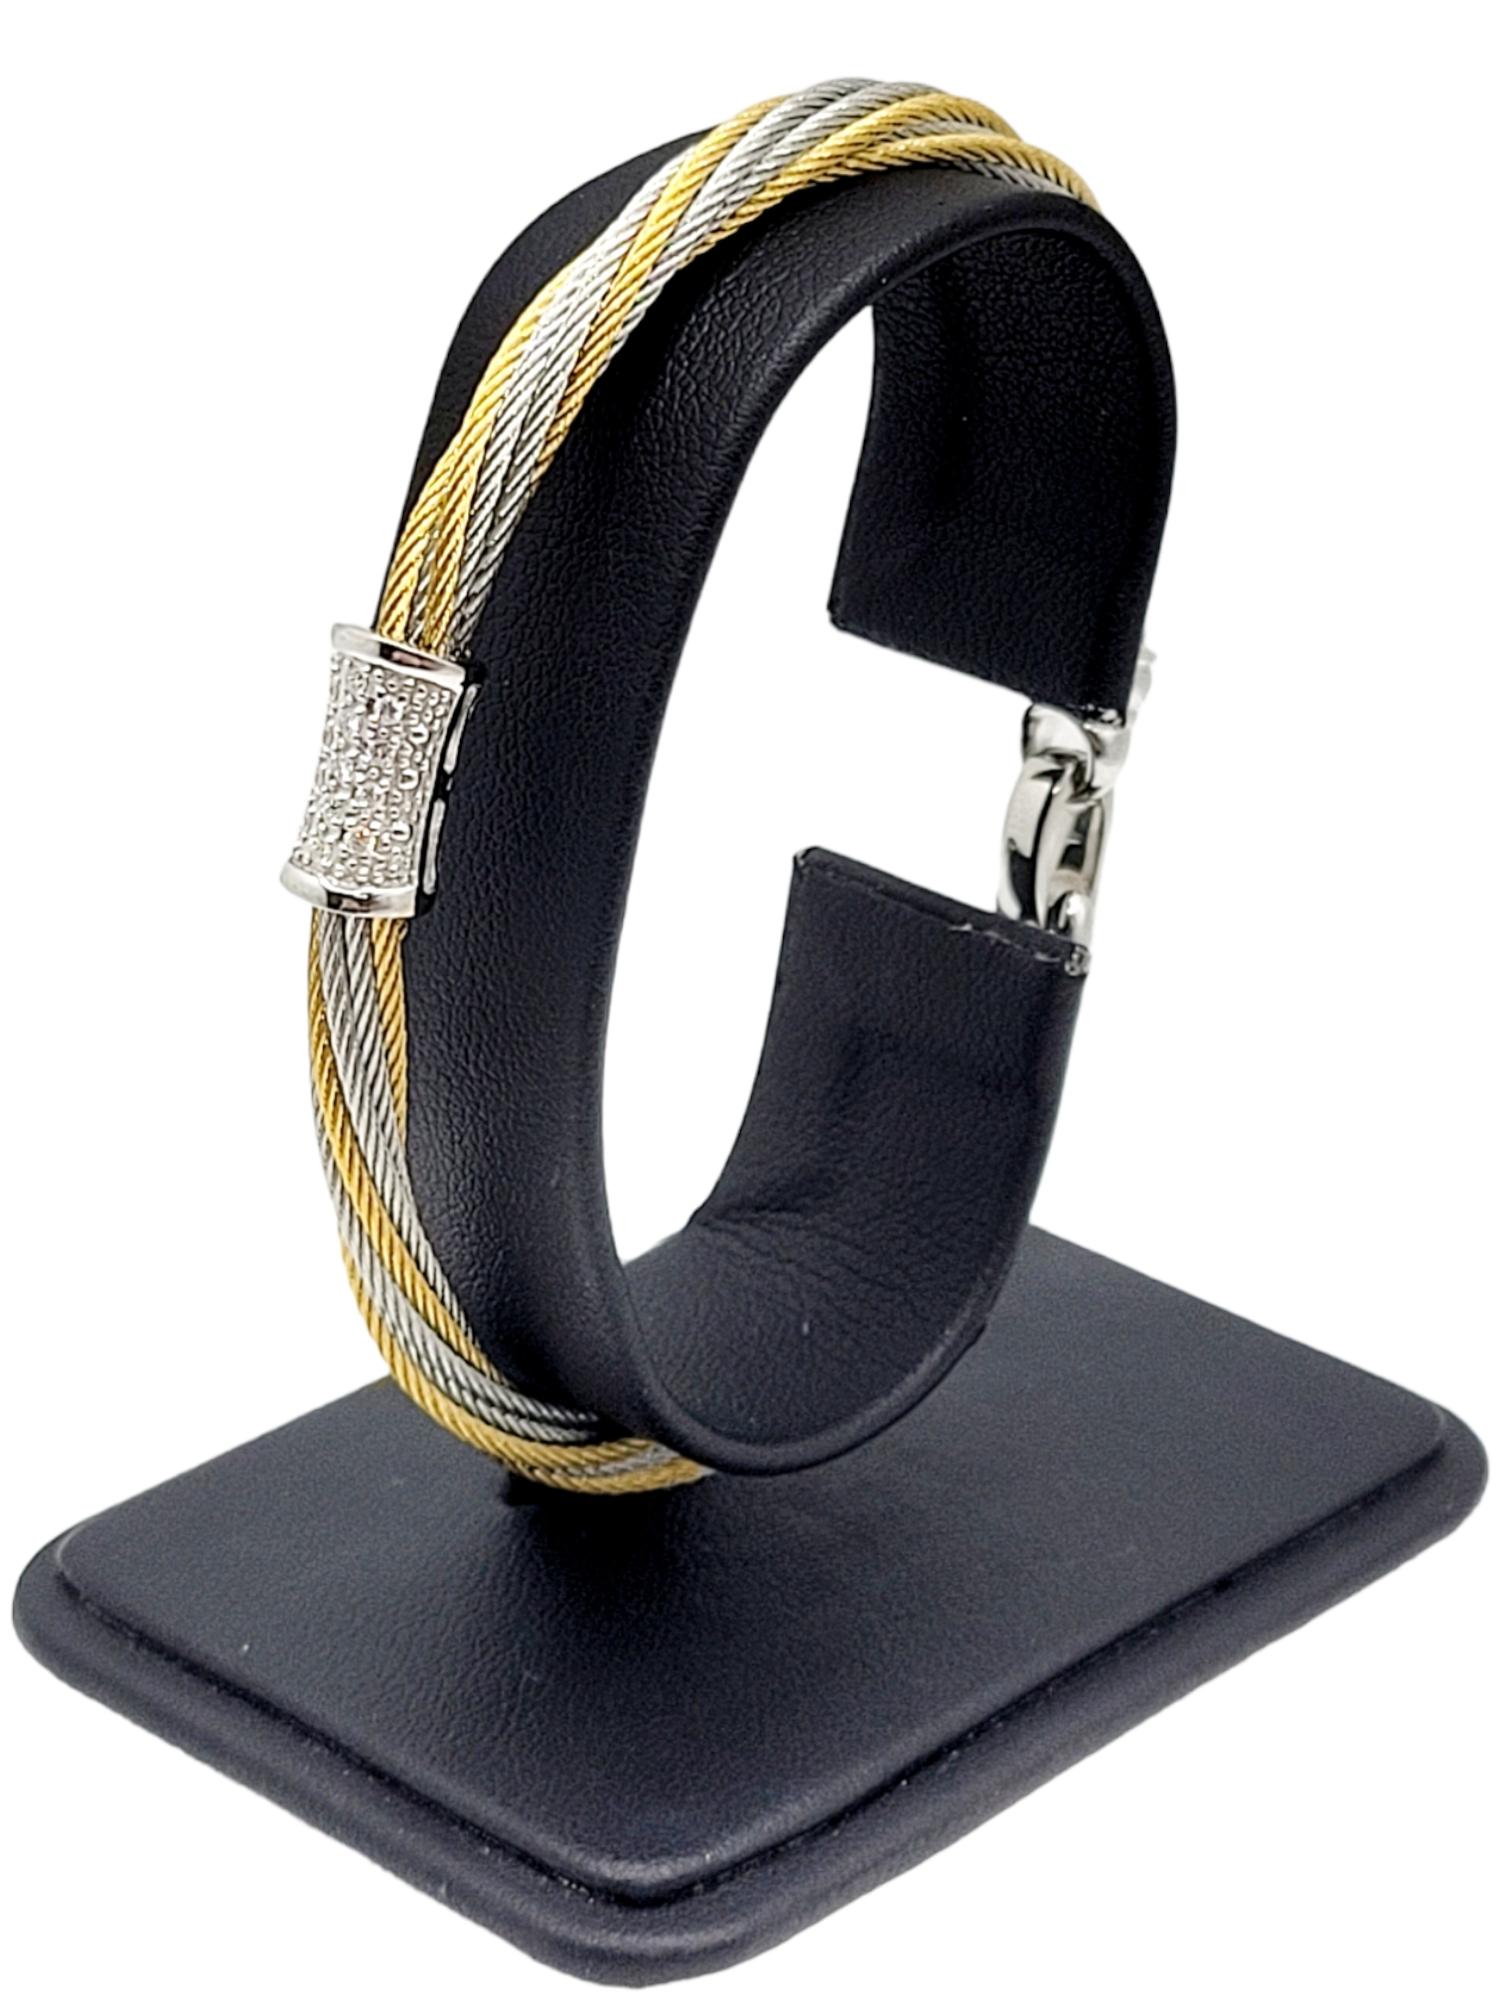 Charriol Diamond Classique Bracelet in Stainless Steel, 18k Yellow & White Gold For Sale 4